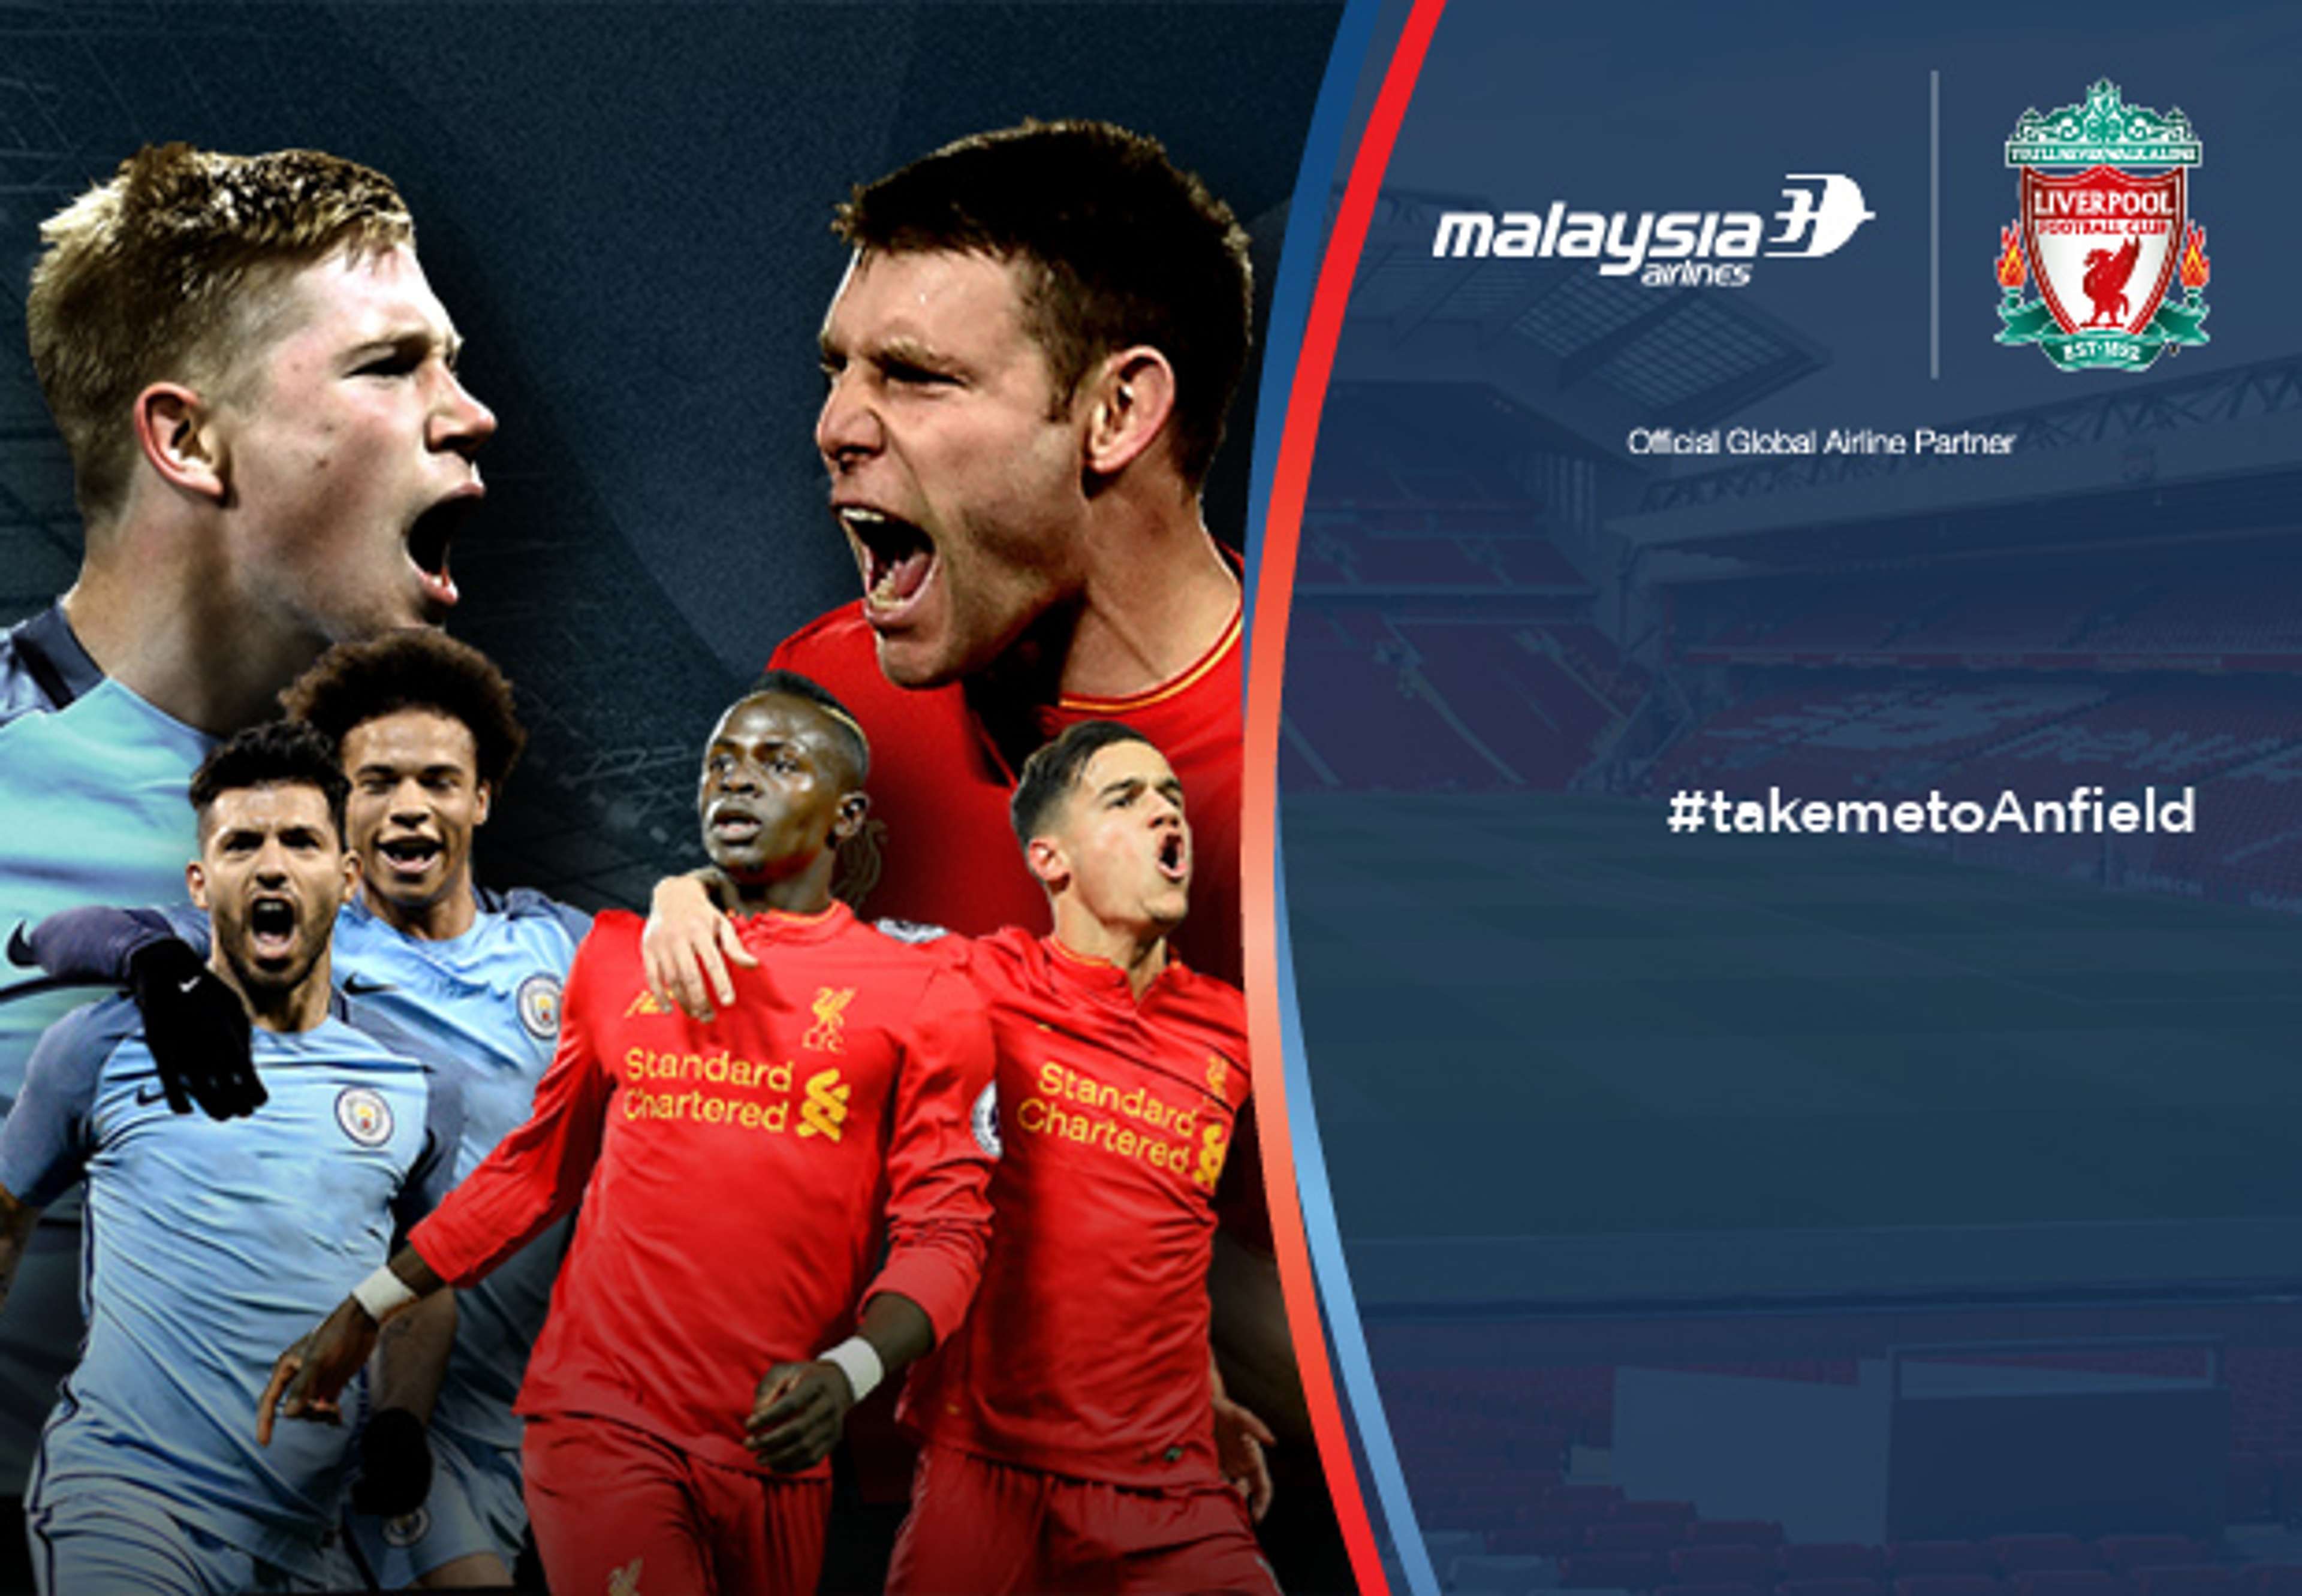 Liverpool, Manchester City, Malaysia Airlines, Commercial, 17032017